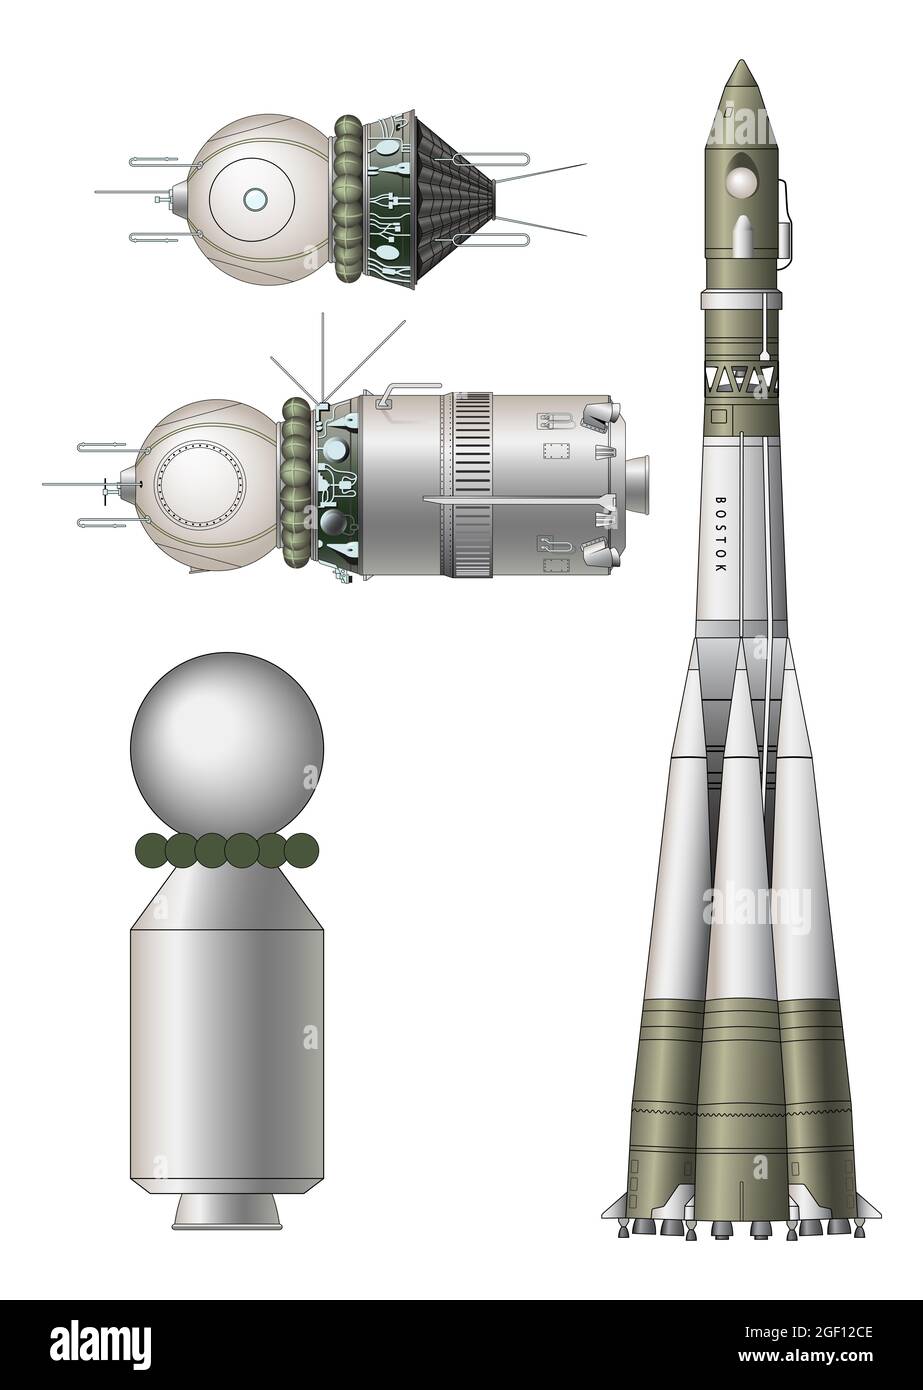 Vostok - Voskhod - spacecraft with the last stage of the carrier rocket - illustration Stock Photo